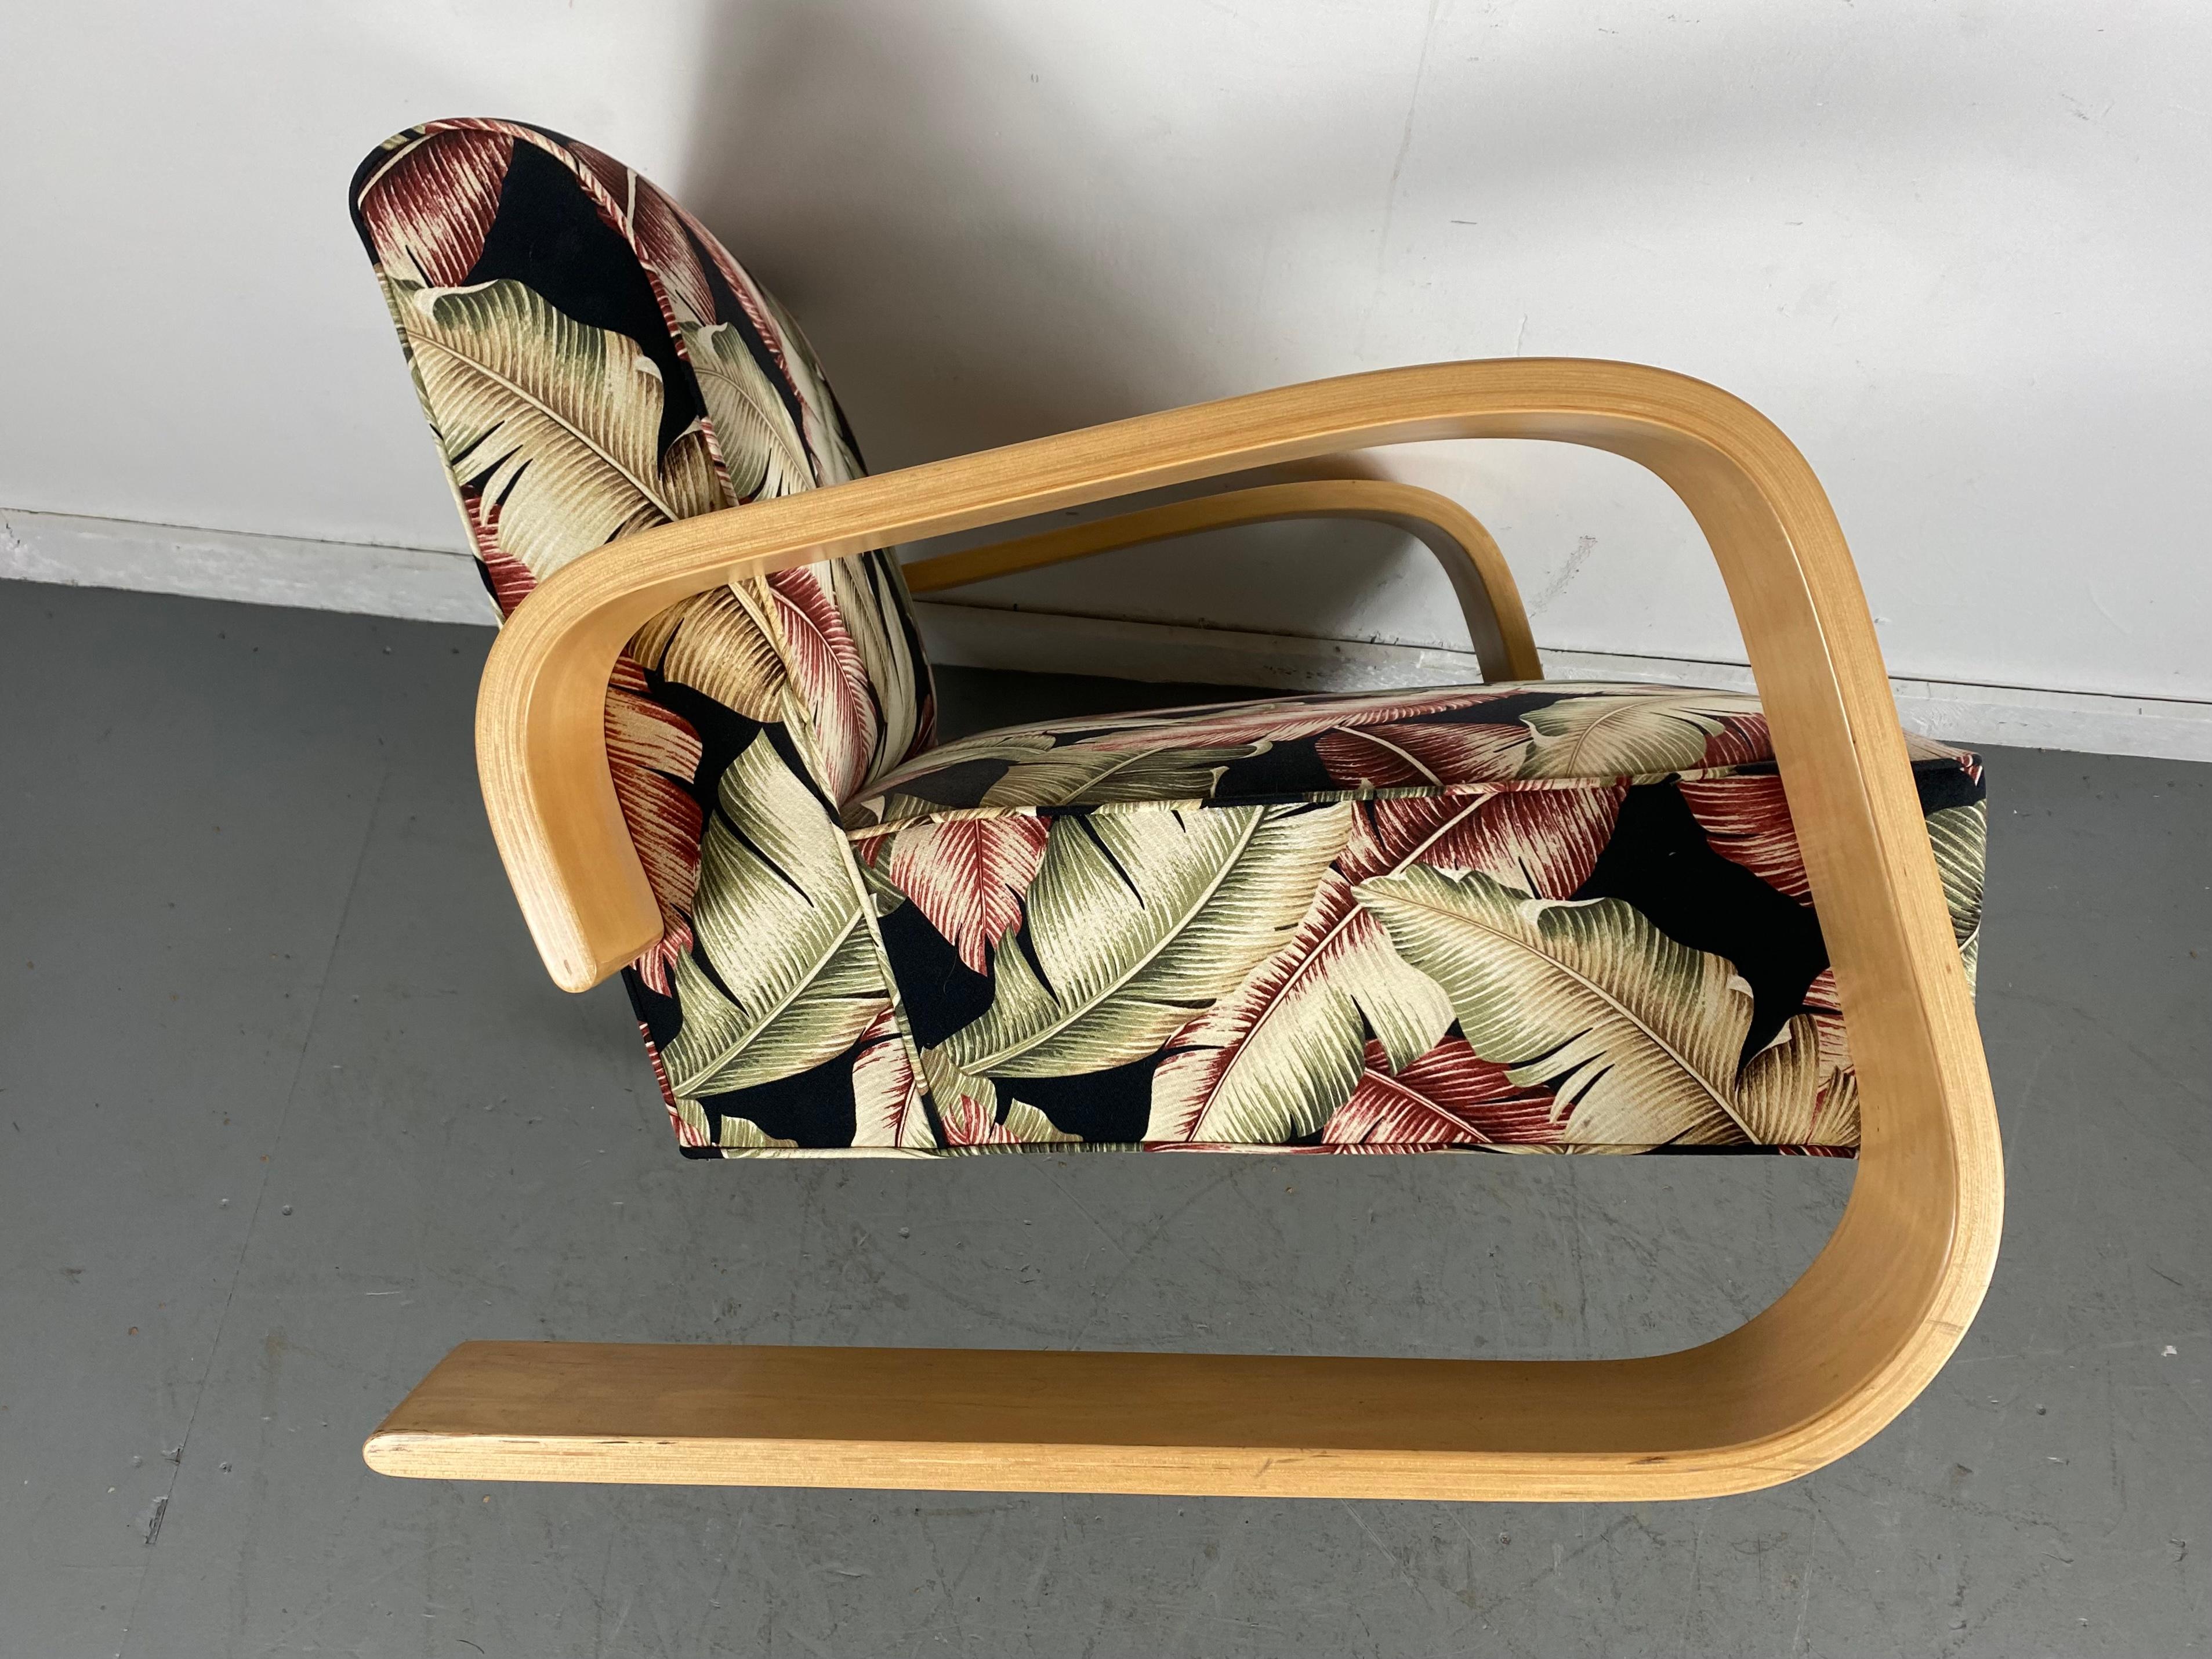 Alvar Aalto tank chair Model 400, classic modernist Bauhaus design, recenntly reupholstered.

 Armchair 400 was created by Alvar Aalto in 1936 for an exhibition at the Milan Triennale, where it was promptly awarded a prize. The chair owes its